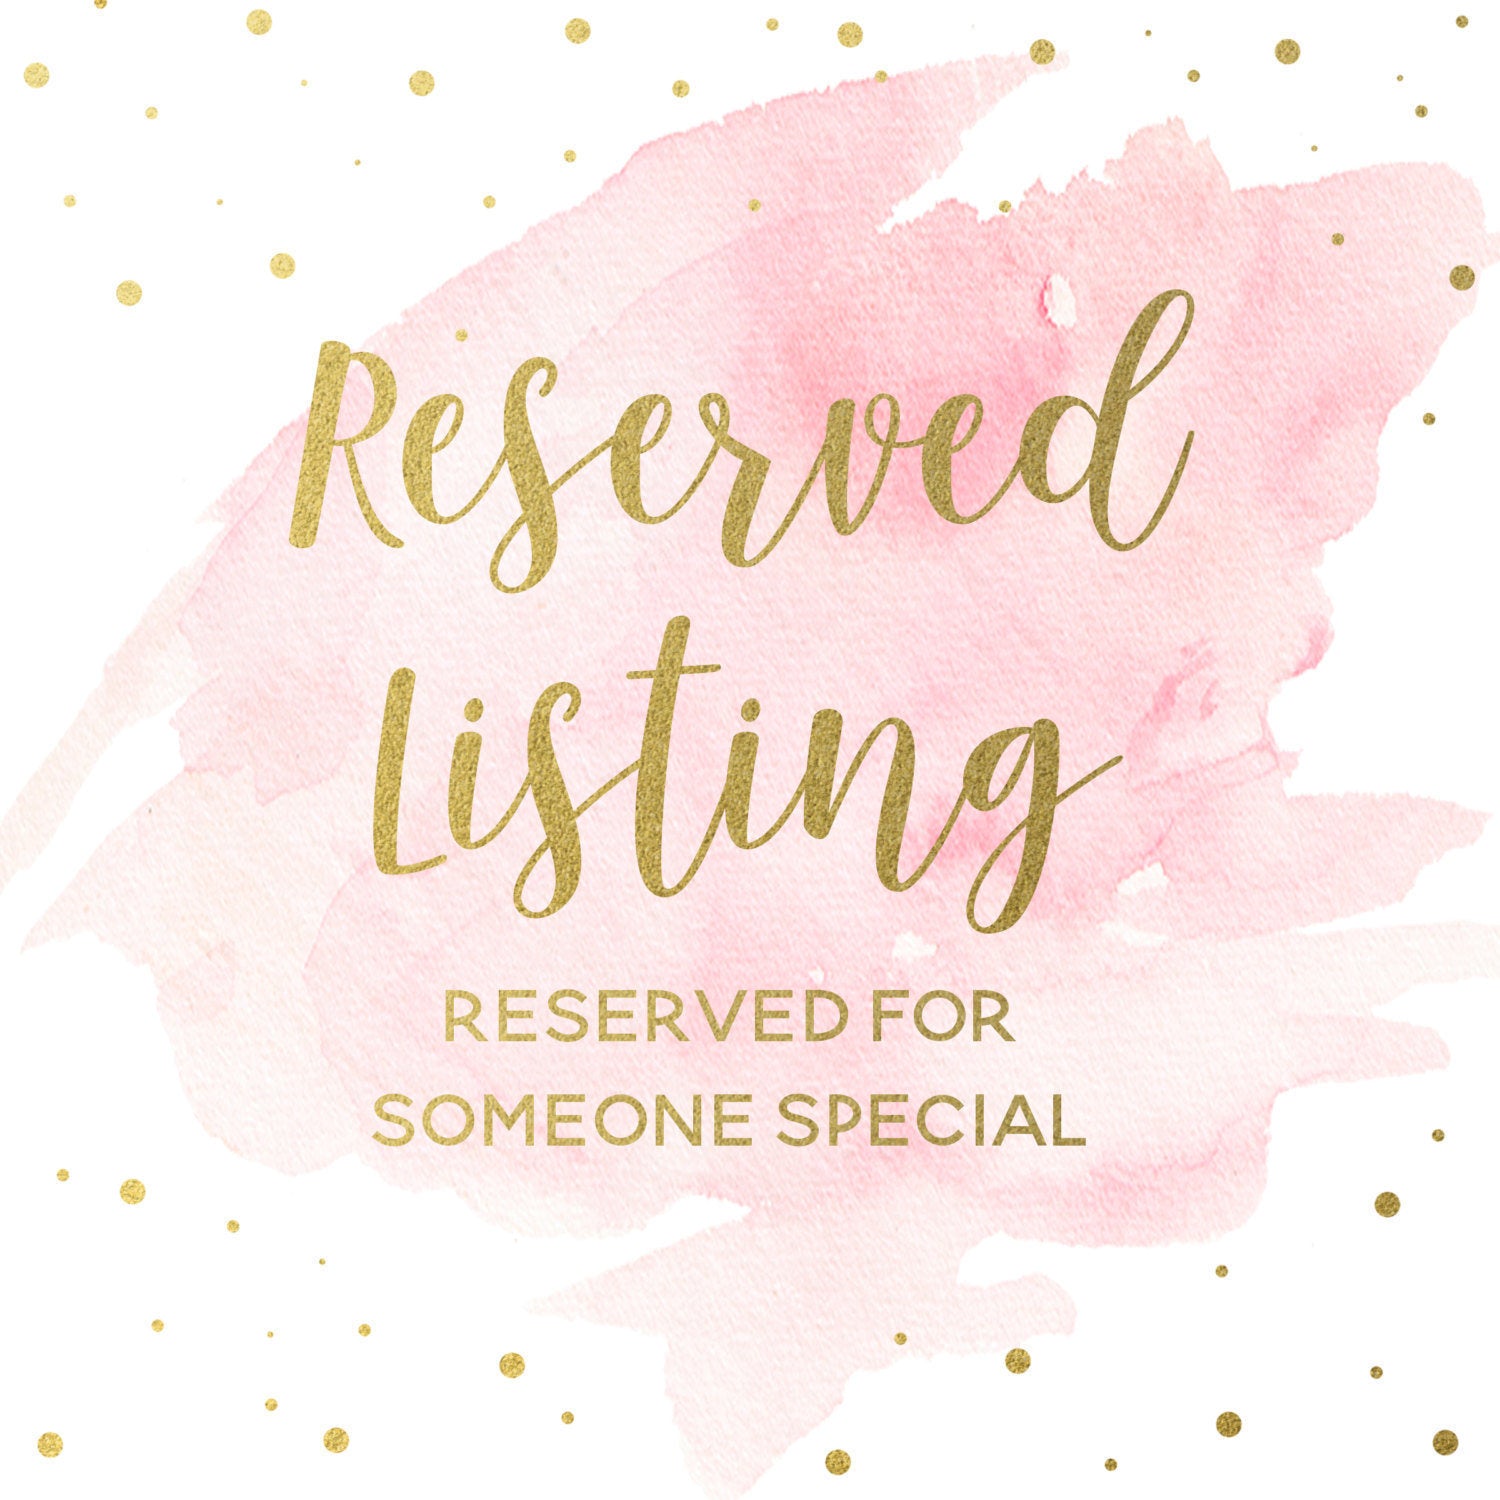 Reserved Listing - Christie G